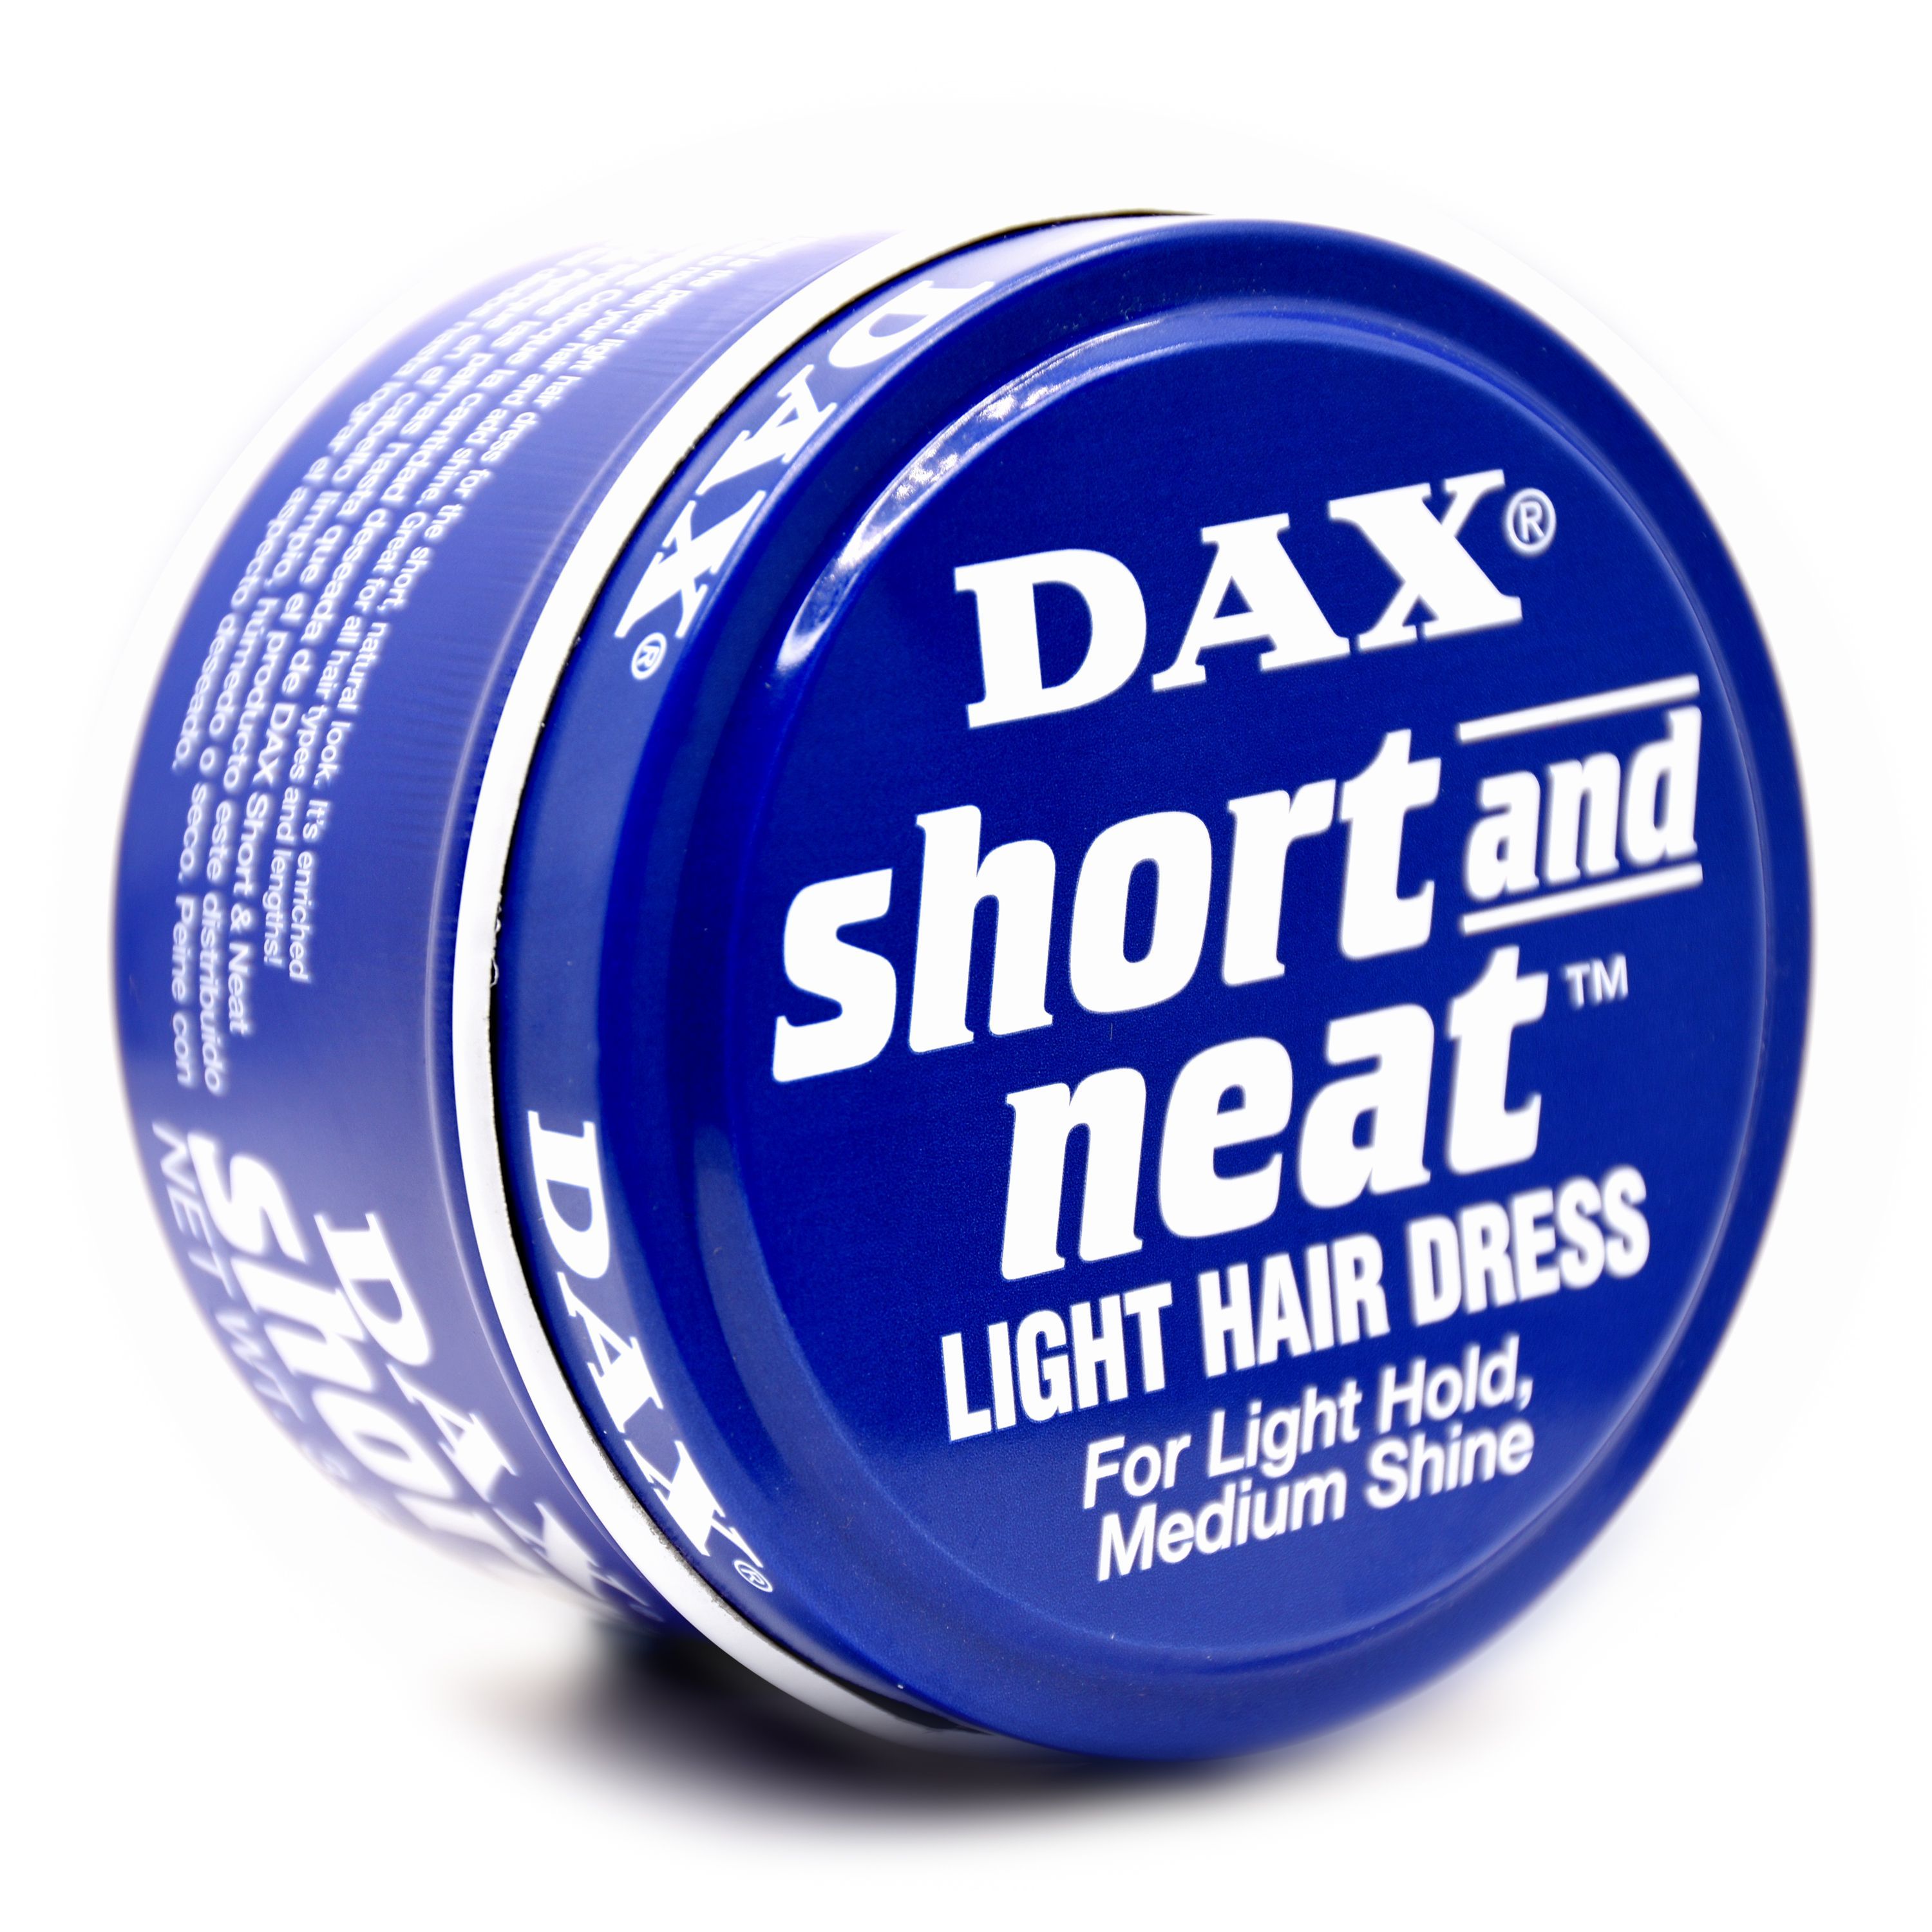 DAX Short and Neat - 3.5oz